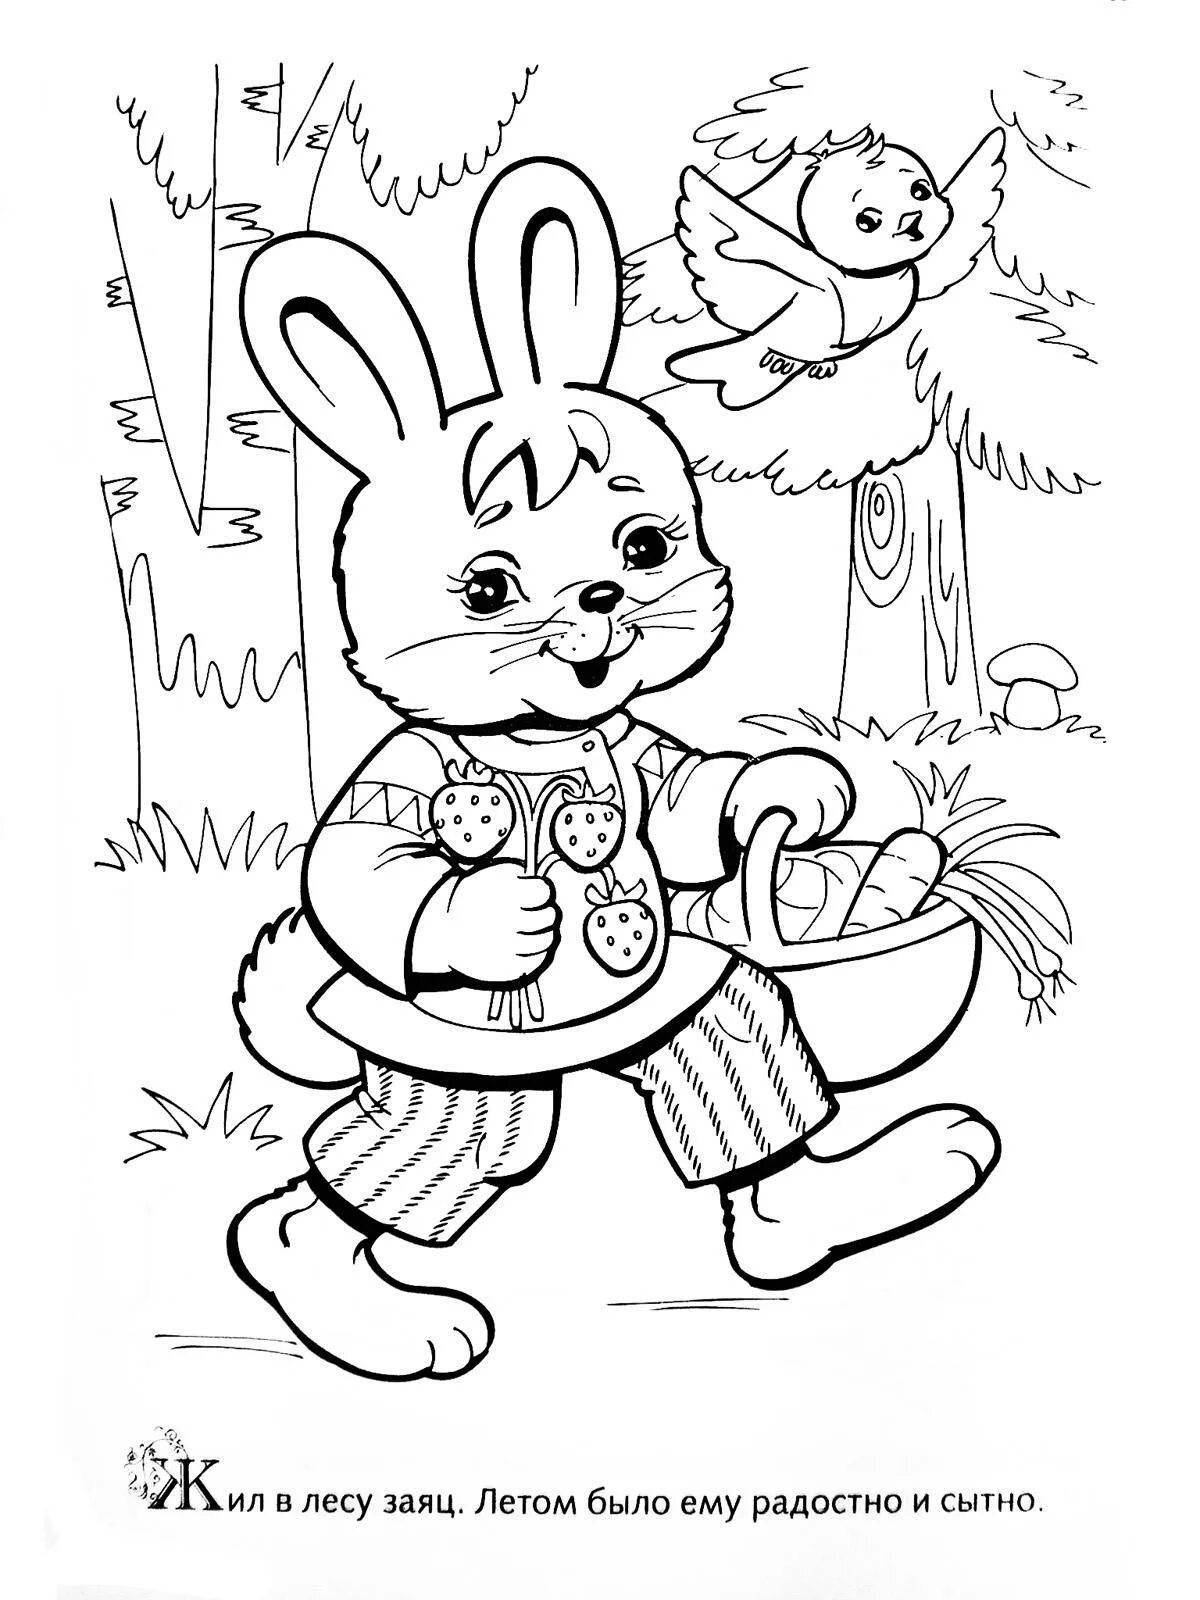 Playful coloring bunny hare